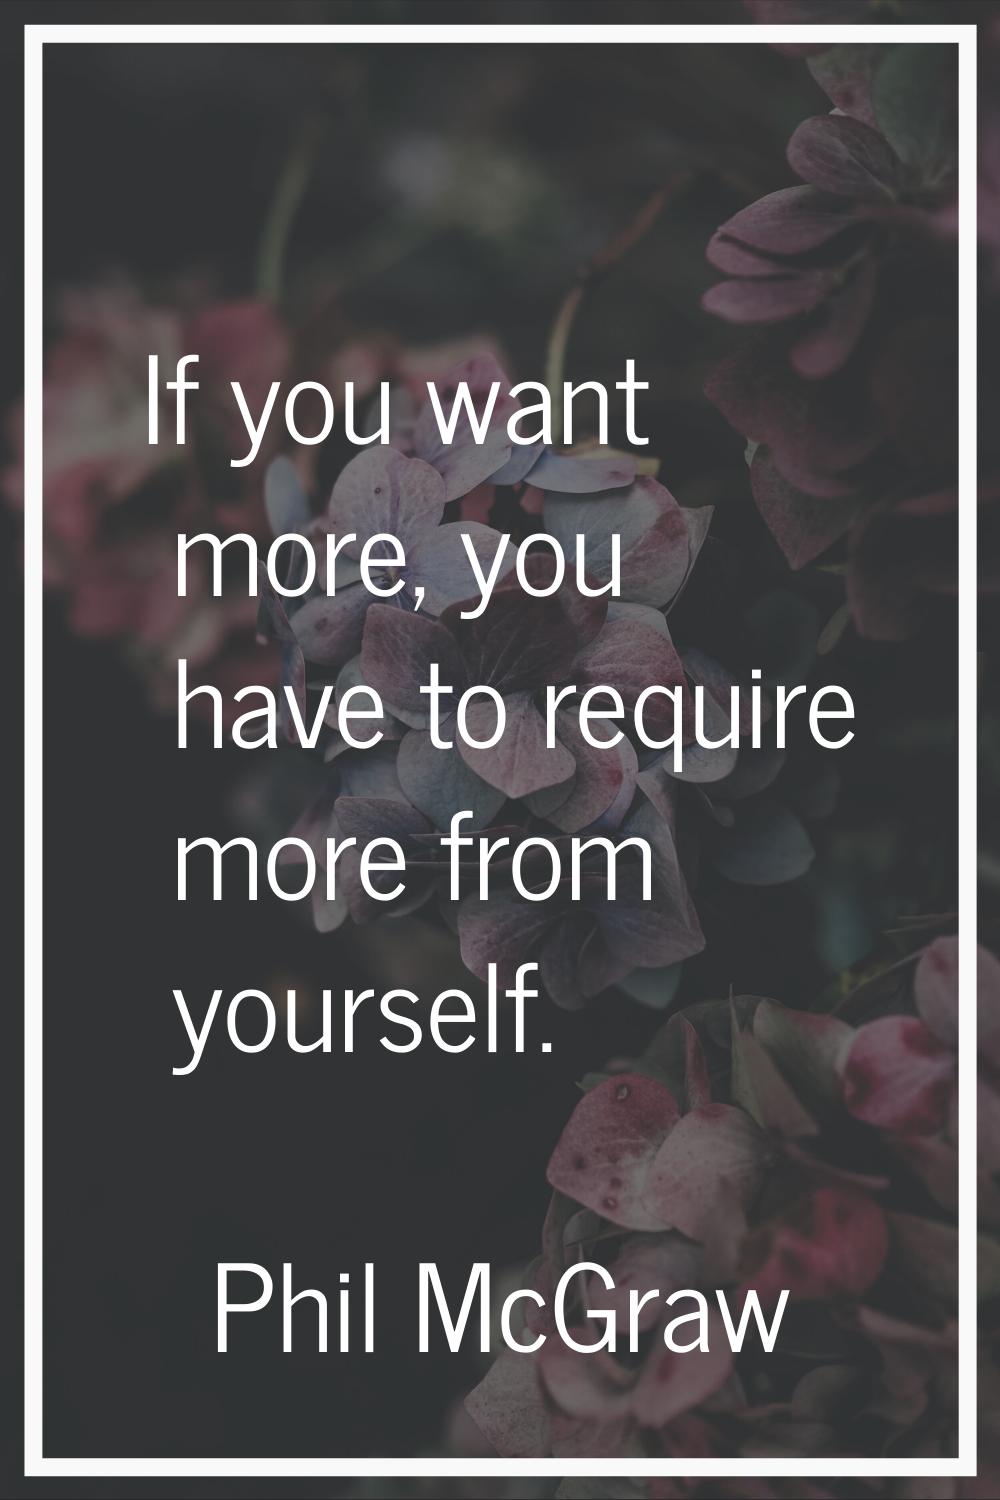 If you want more, you have to require more from yourself.